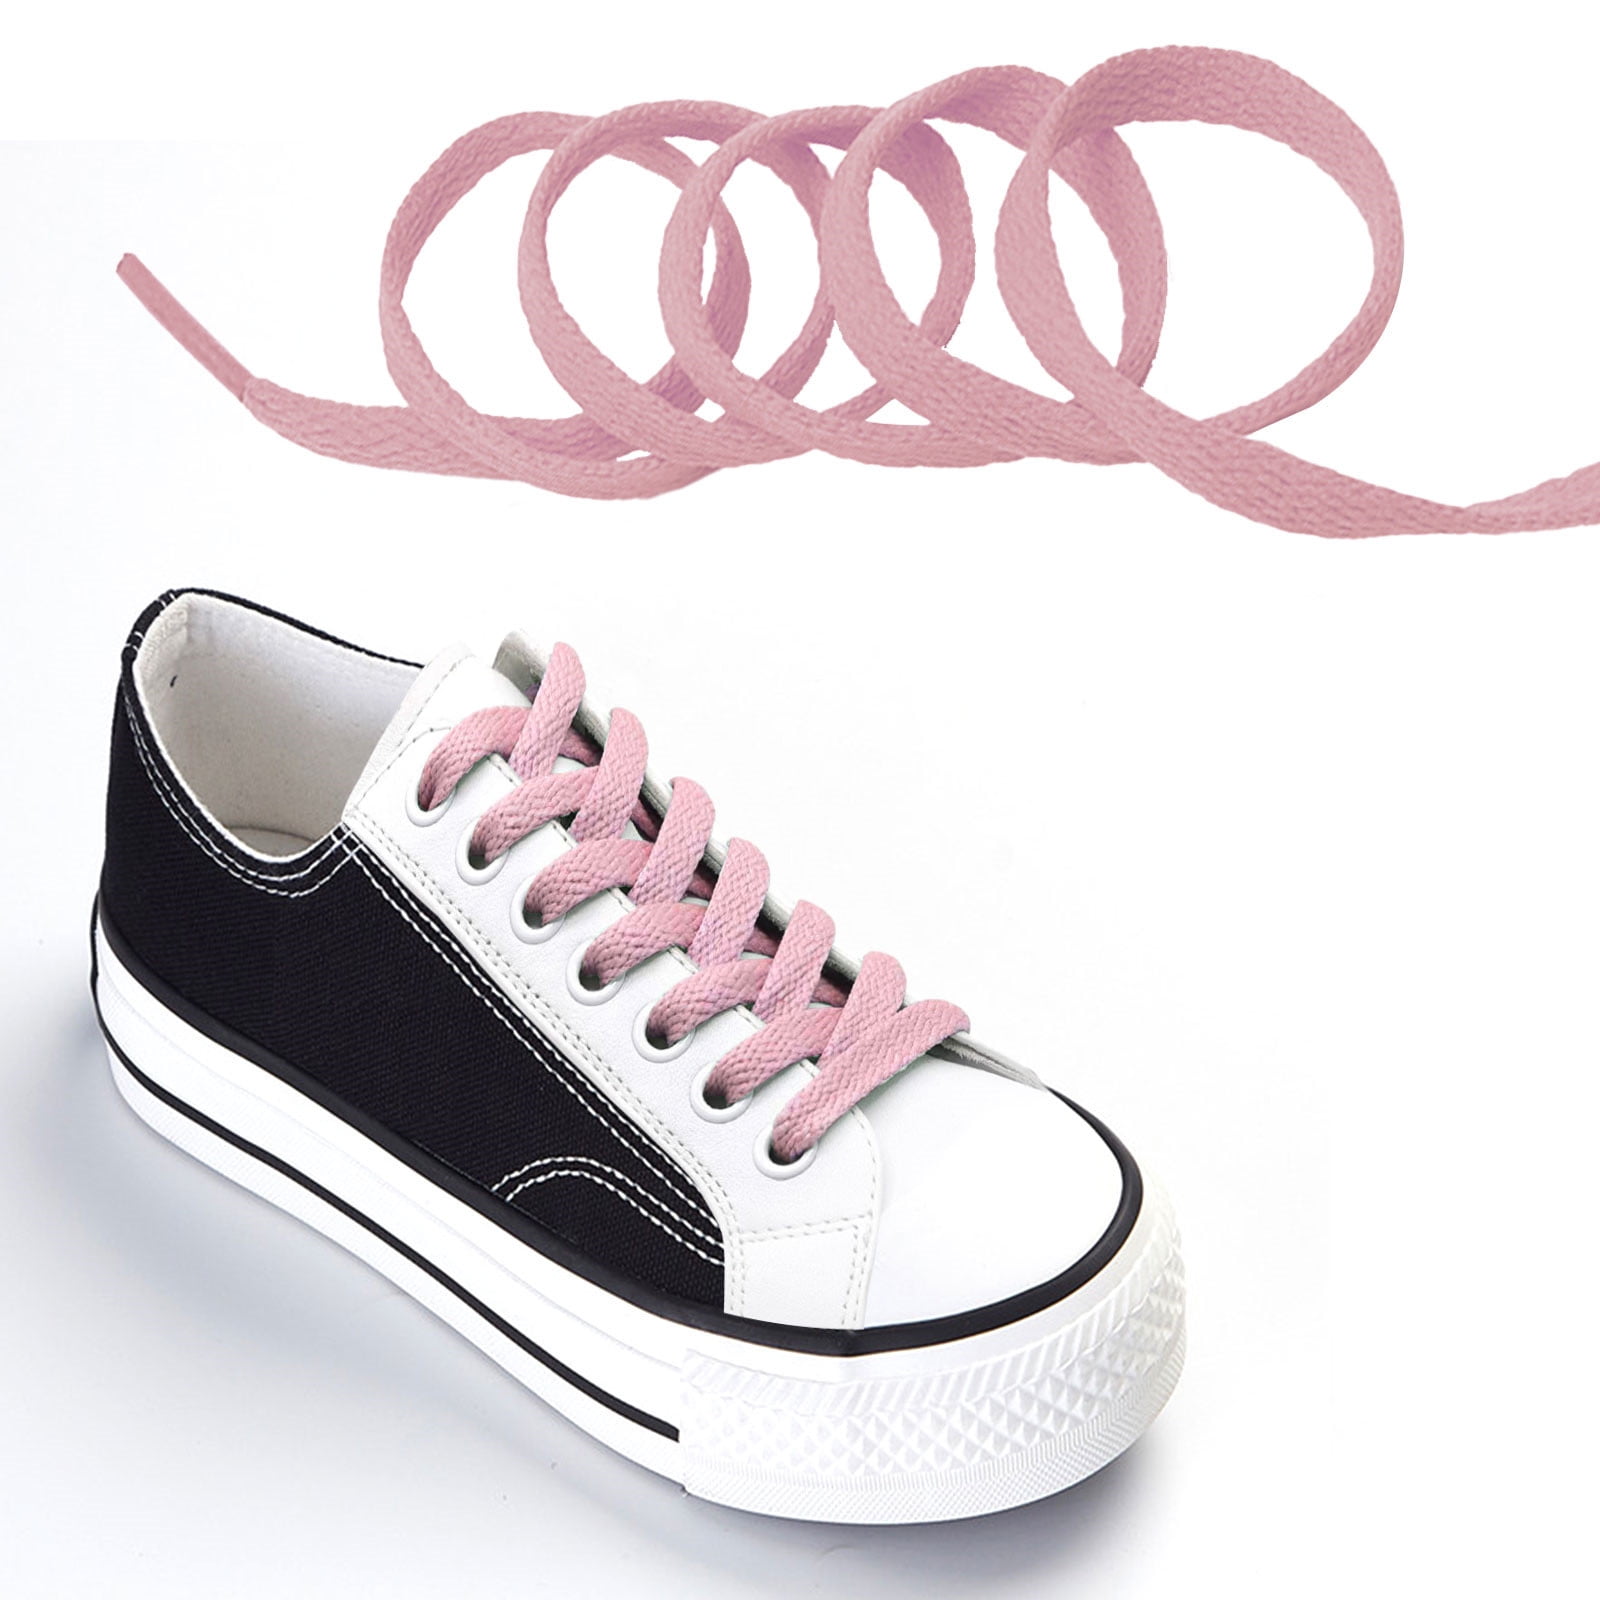 Flat Colorful Pastel SHOELACES Spring Laces For Any Shoes  BUY 2 GET 1 FREE 